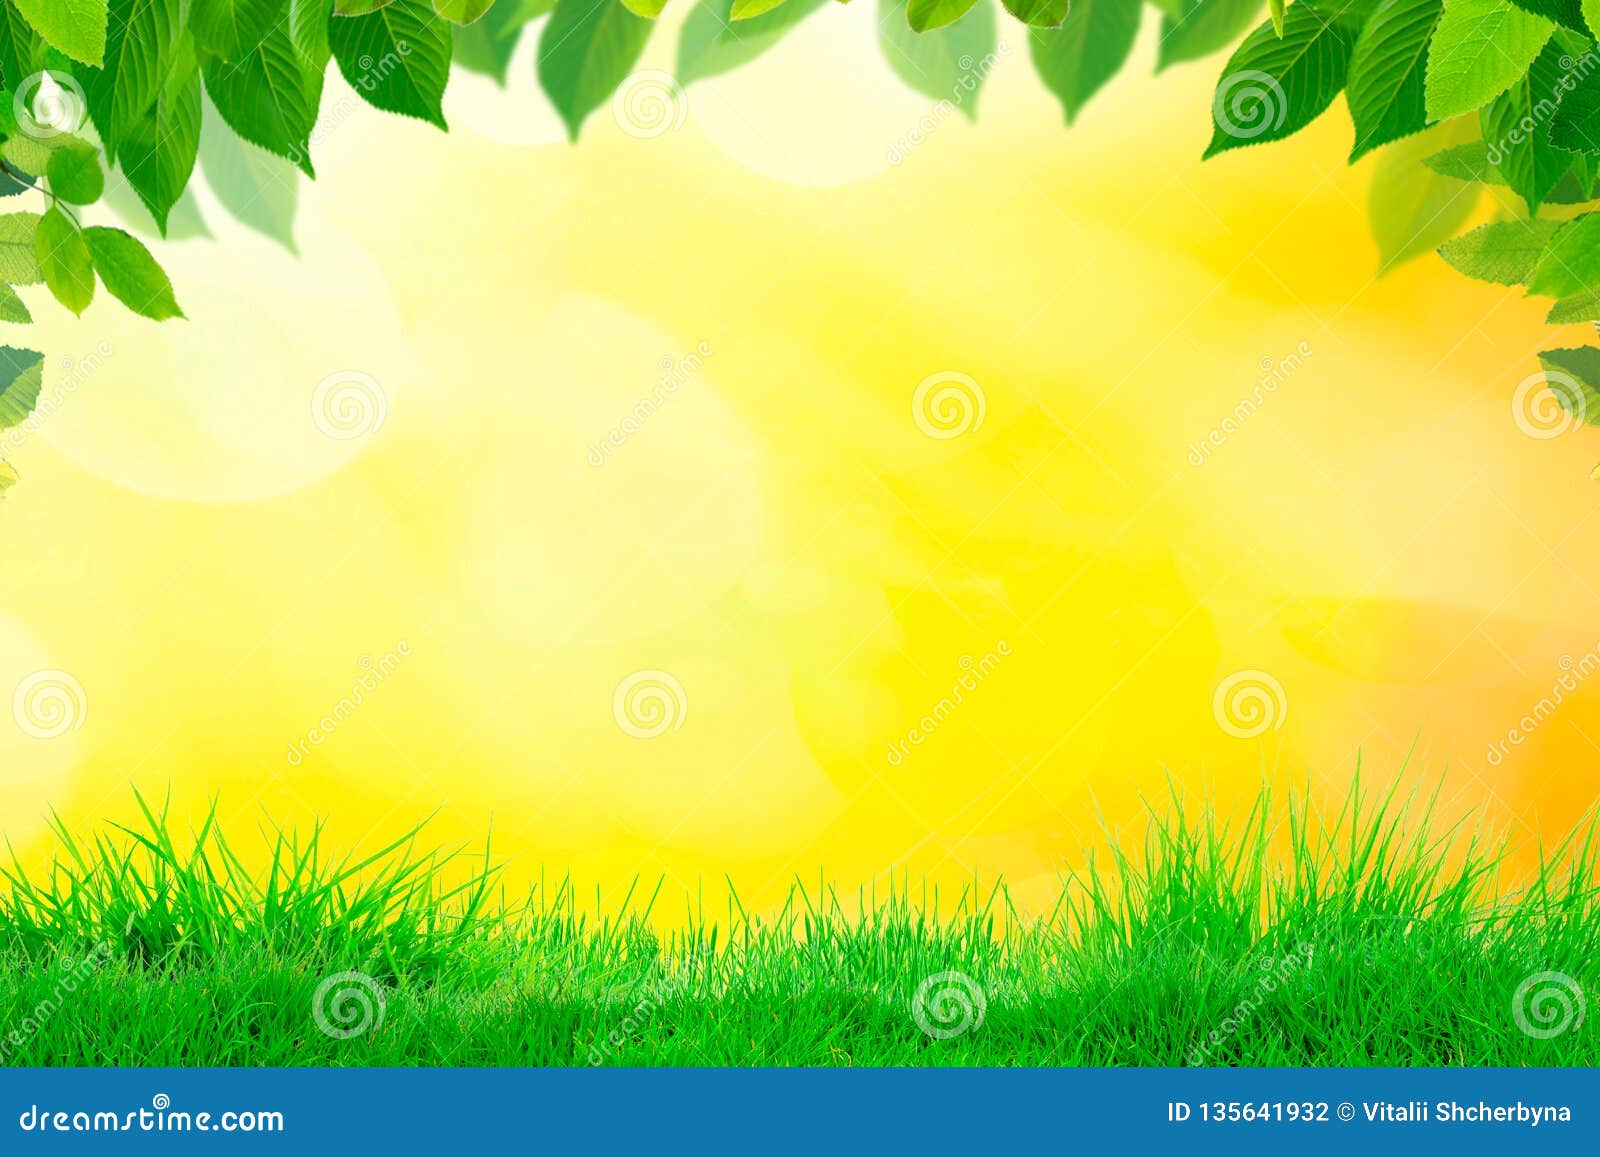 Empty Grass Top with Blur Park Yellow Nature Background Bokeh ...